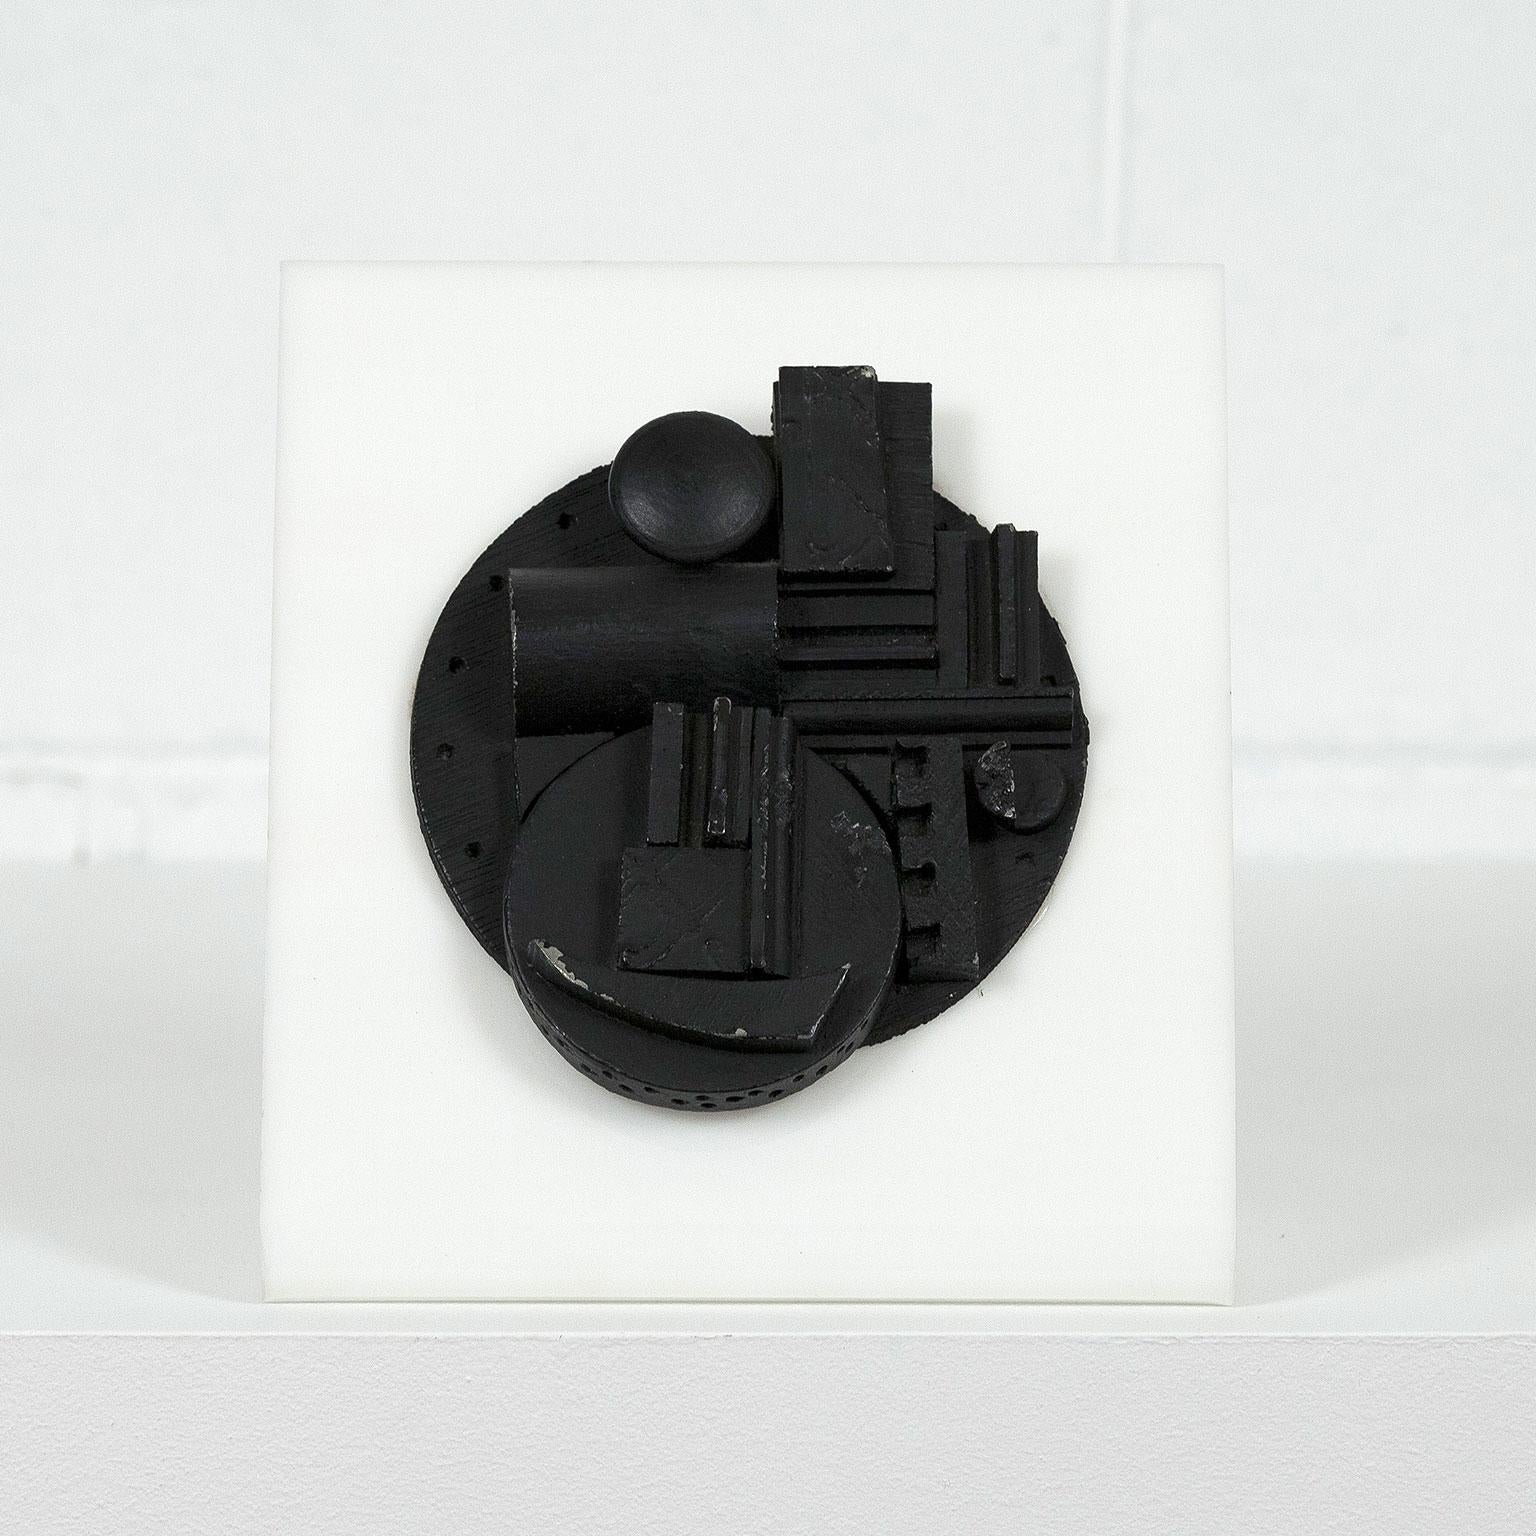 Caviar20 is excited to be offering this fantastic sculpture by the inimitable Louise Nevelson - one of the most revered and unique sculptors of the 20th century.

Over the last few years there has been tremendous momentum in both interest and